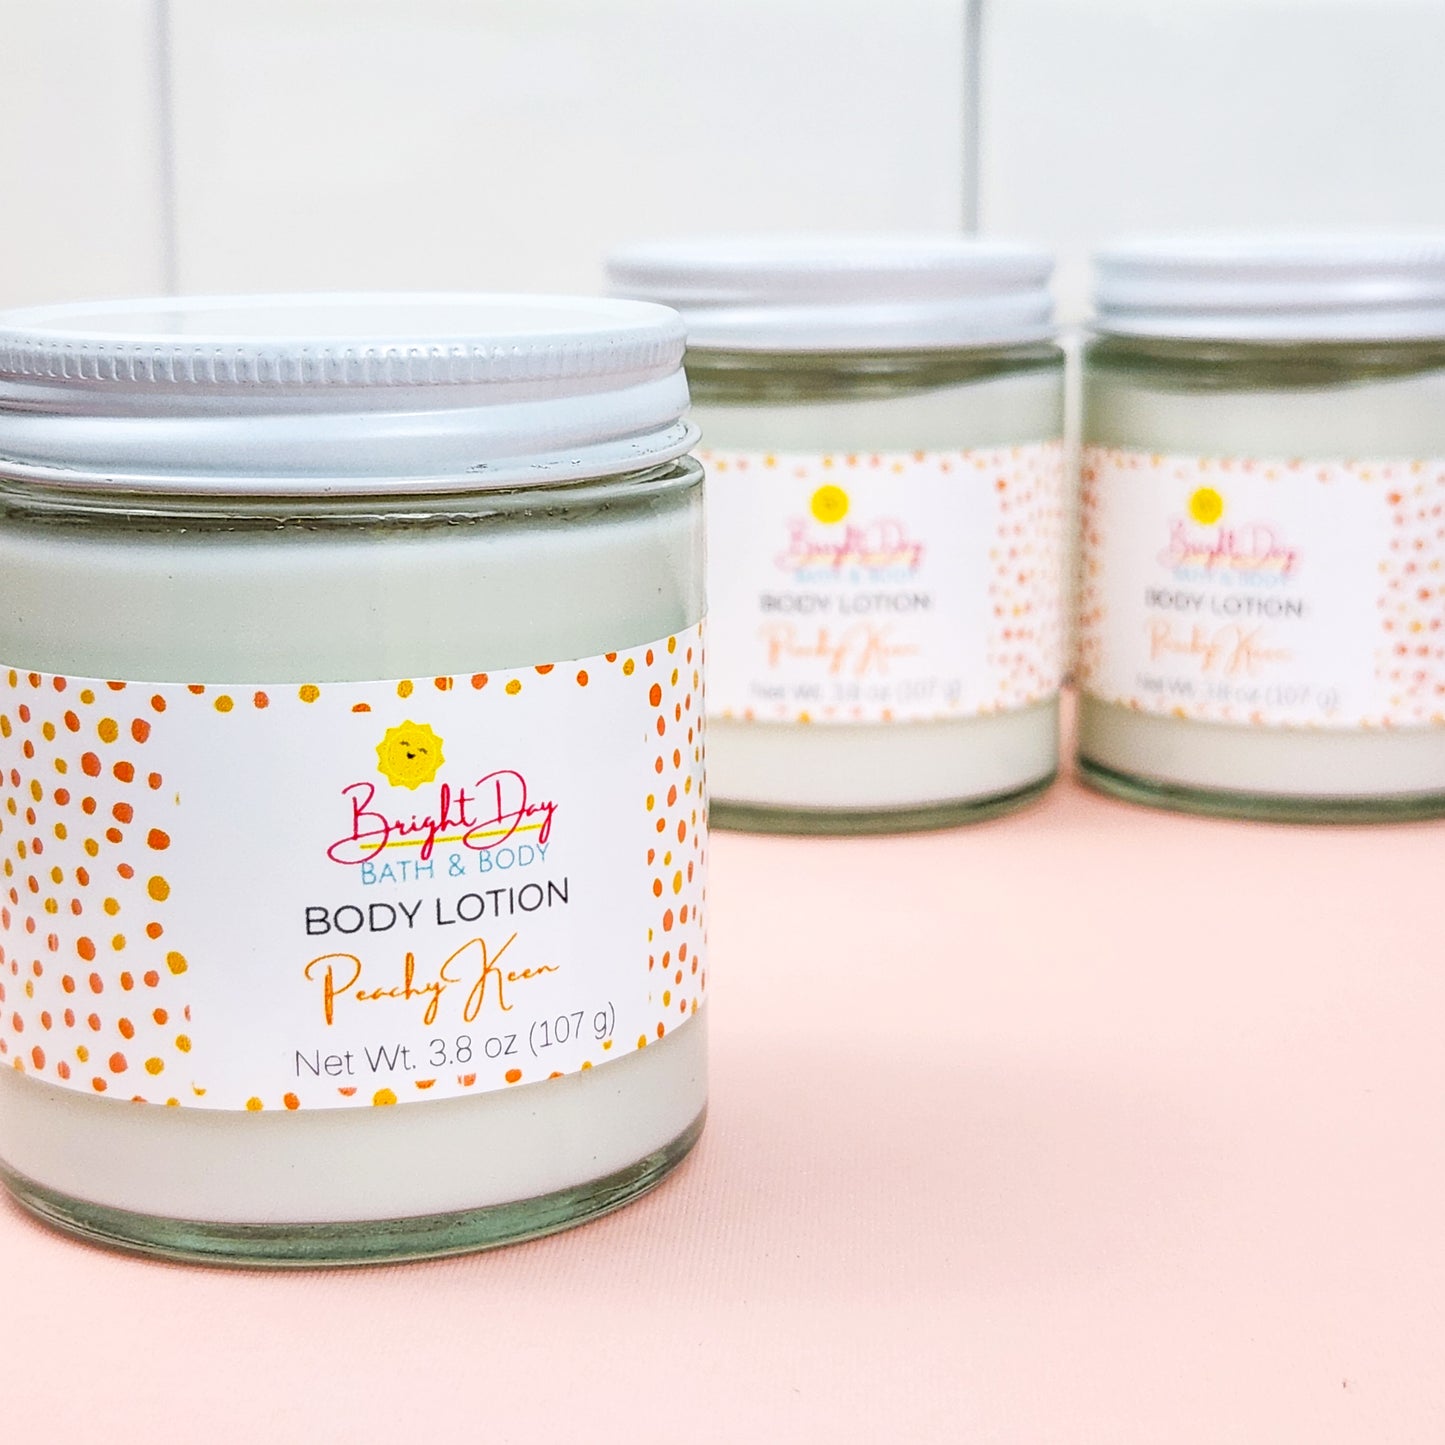 Three jars of Peachy Keen Body Lotion on a pink and white background.